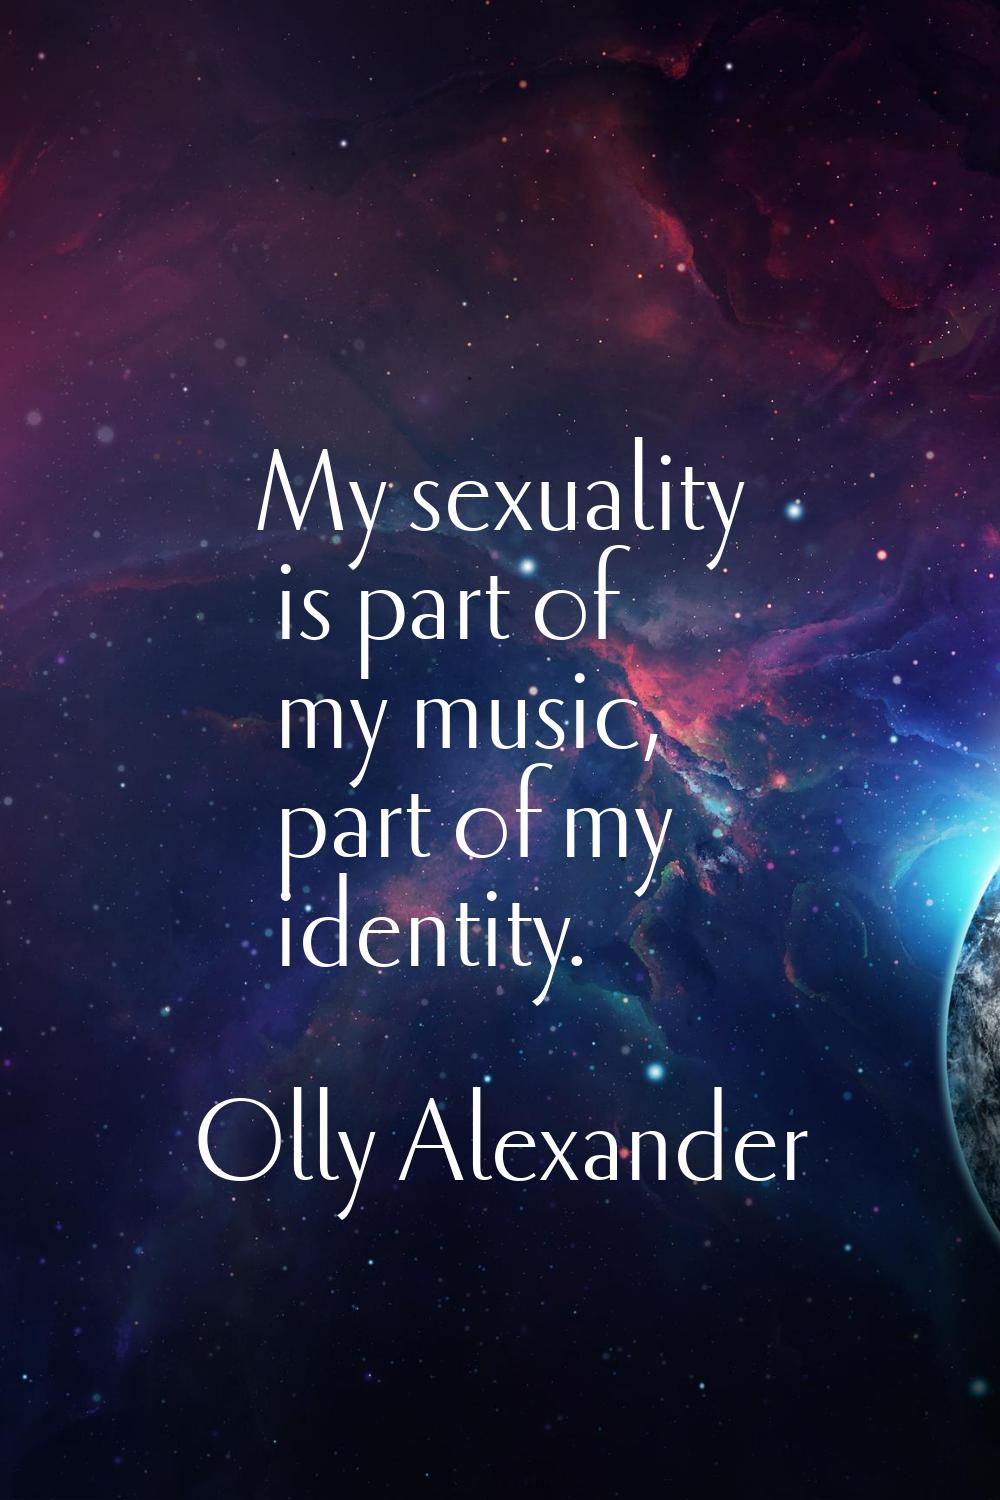 My sexuality is part of my music, part of my identity.